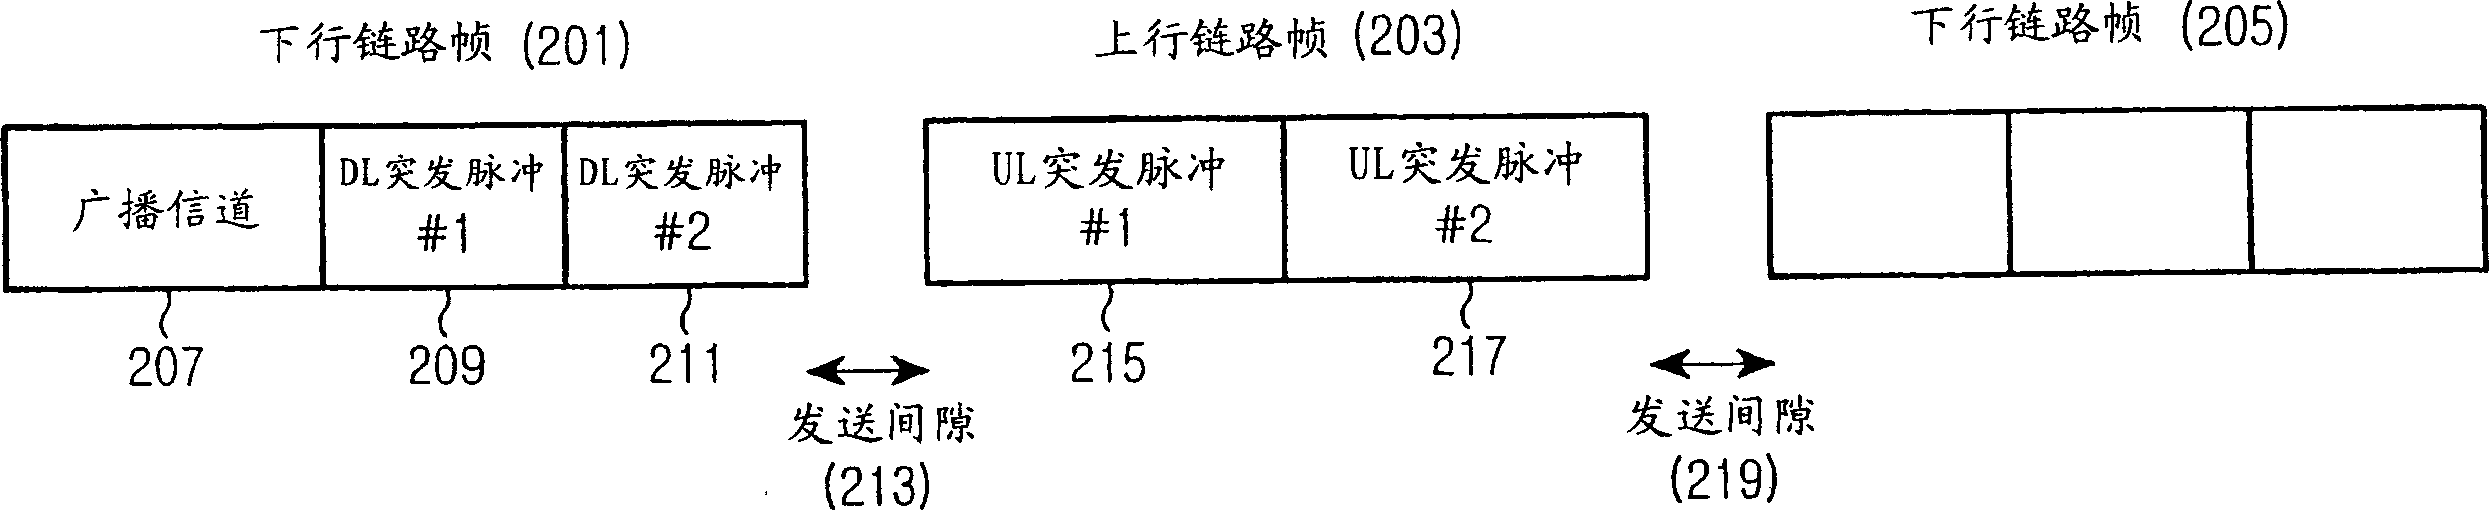 Method and apparatus for adaptive open-loop power control in mobile communication system using tdd